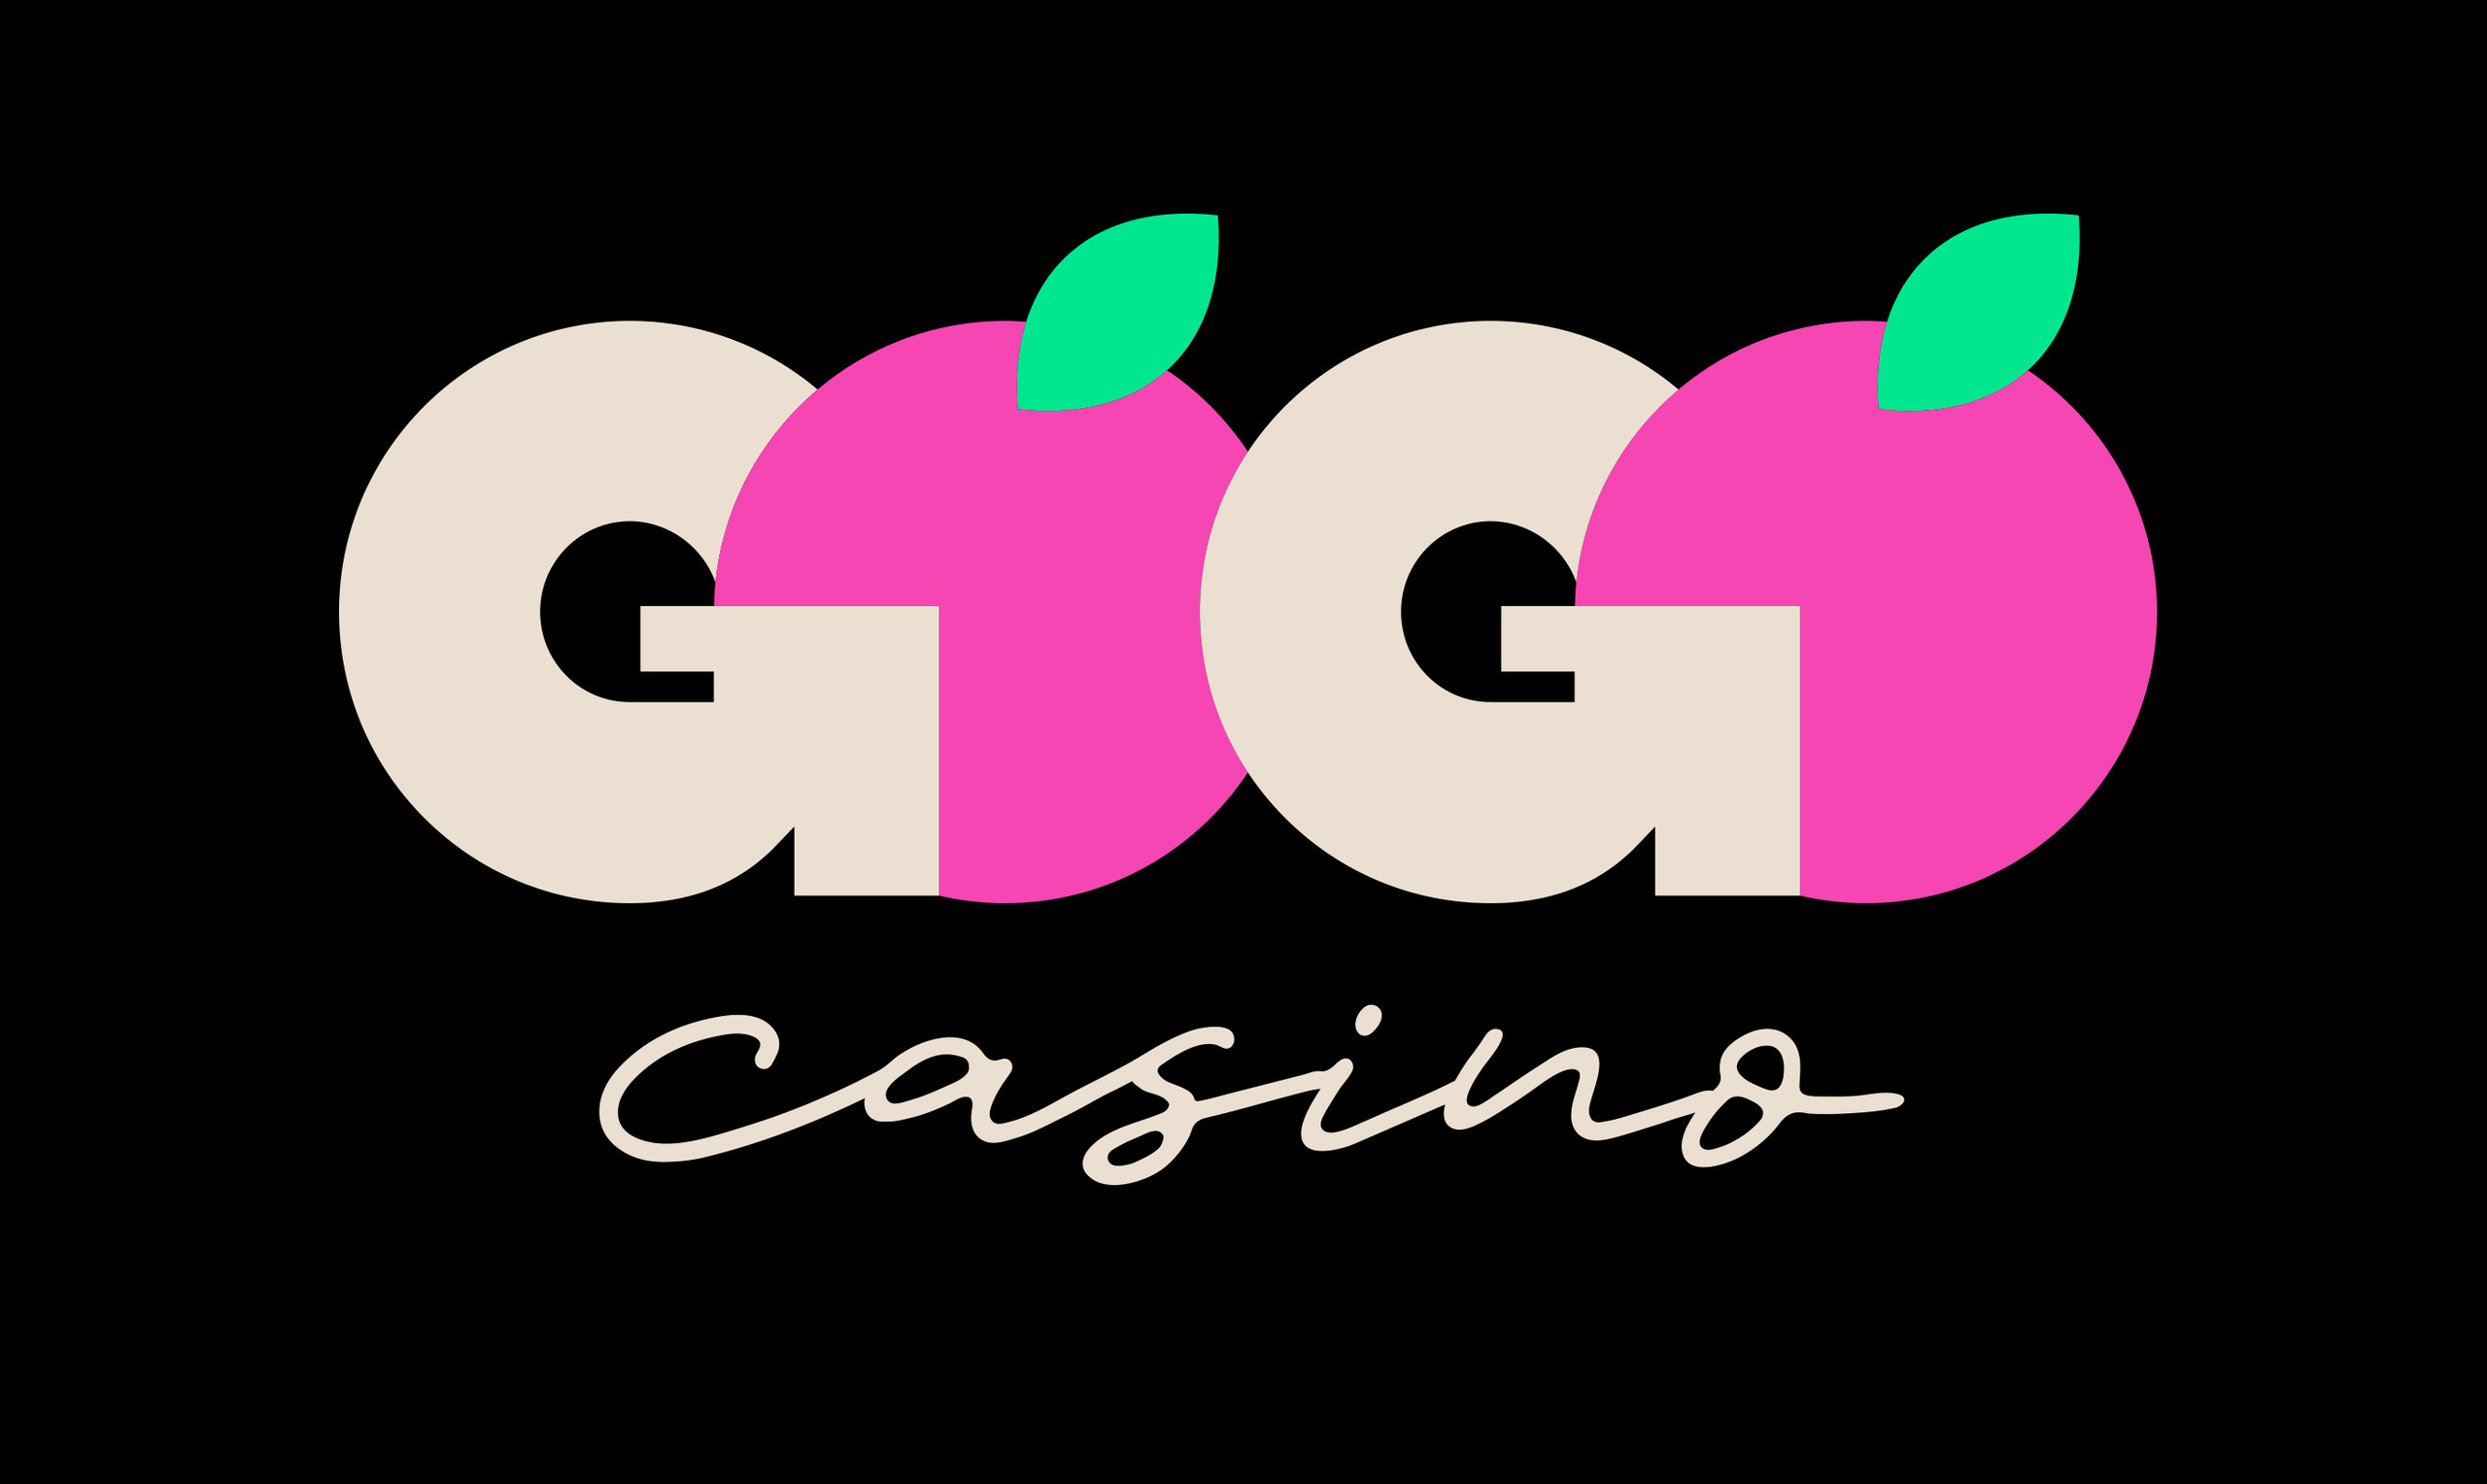 GoGoCasino launched in Finland